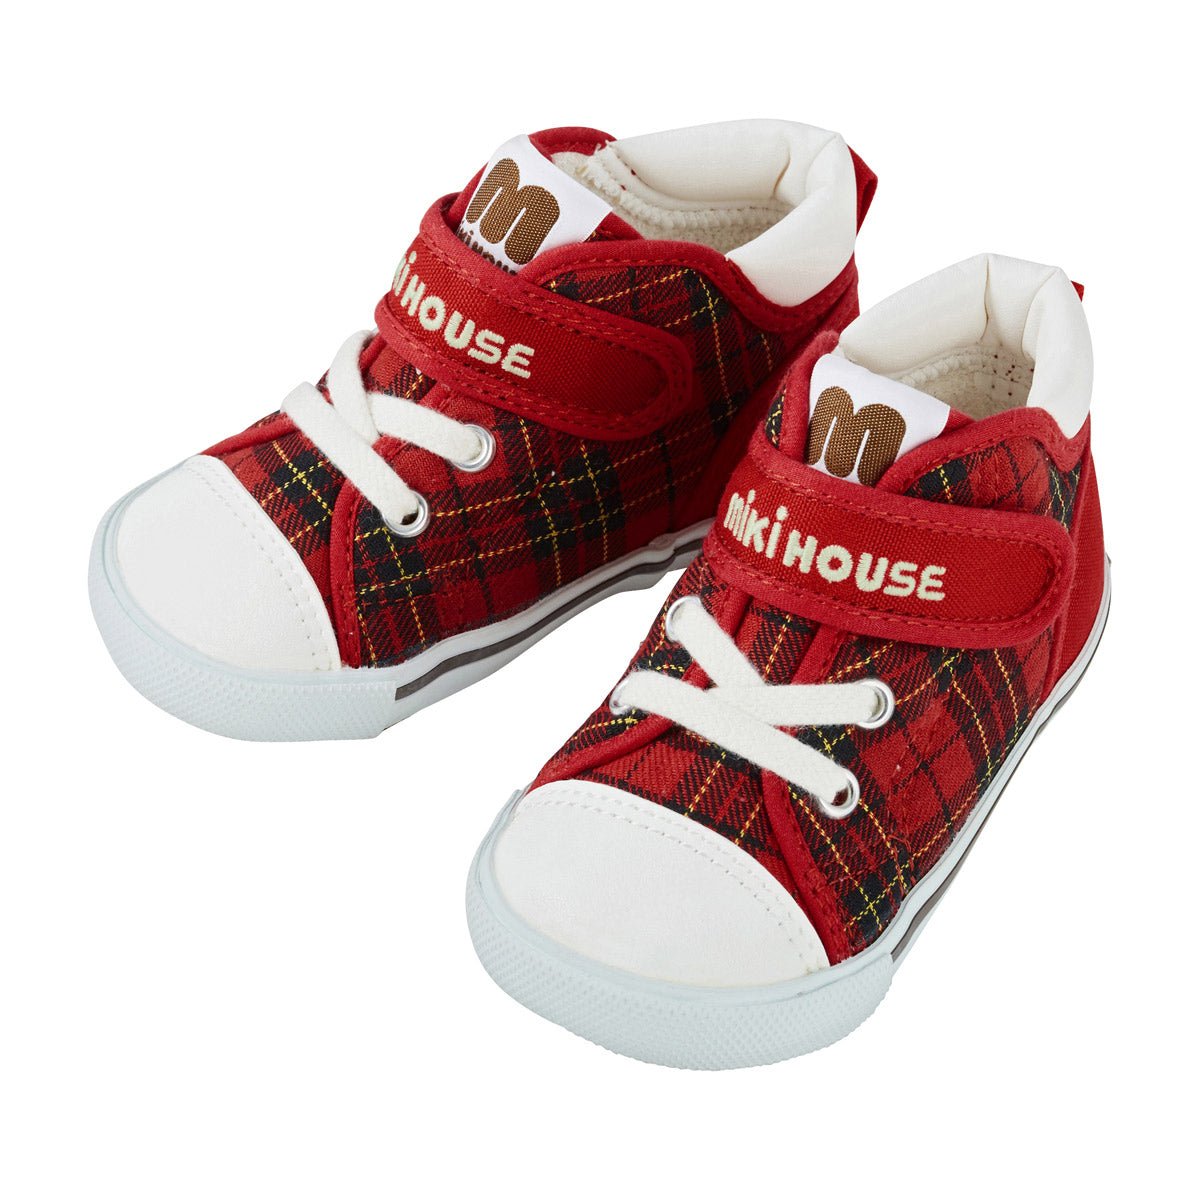 High Top Second Shoes - Stylish Plaid - MIKI HOUSE USA